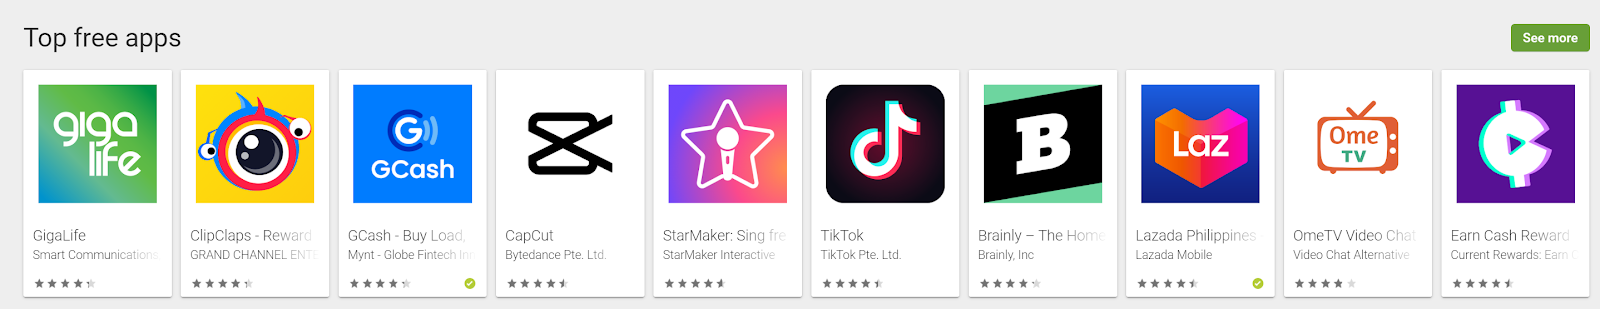 Example of top free apps in the Google Play Store.